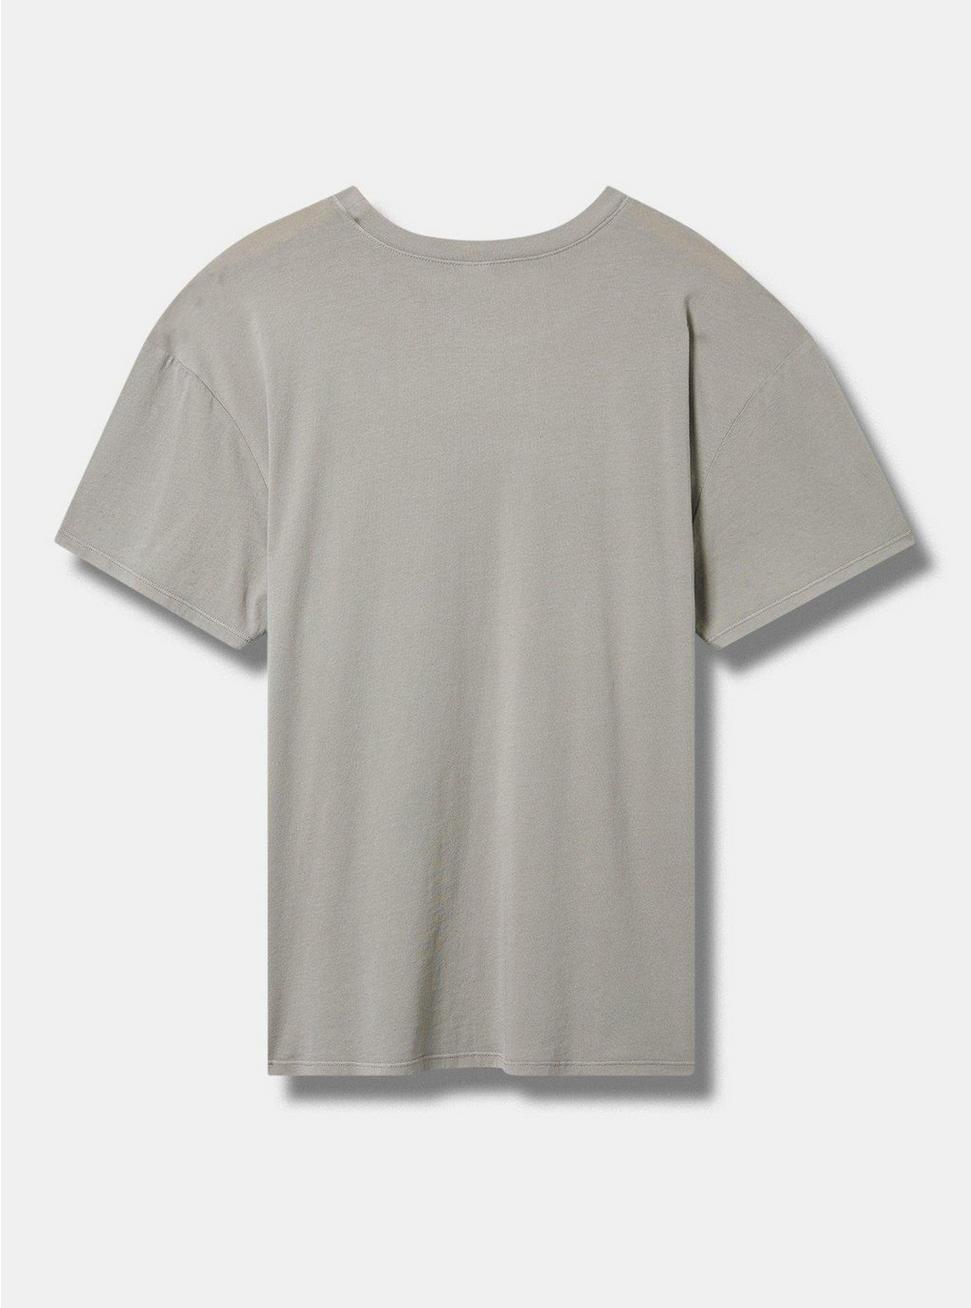 Lady Gaga Relaxed Fit Cotton Boxy Tee, GREY, alternate